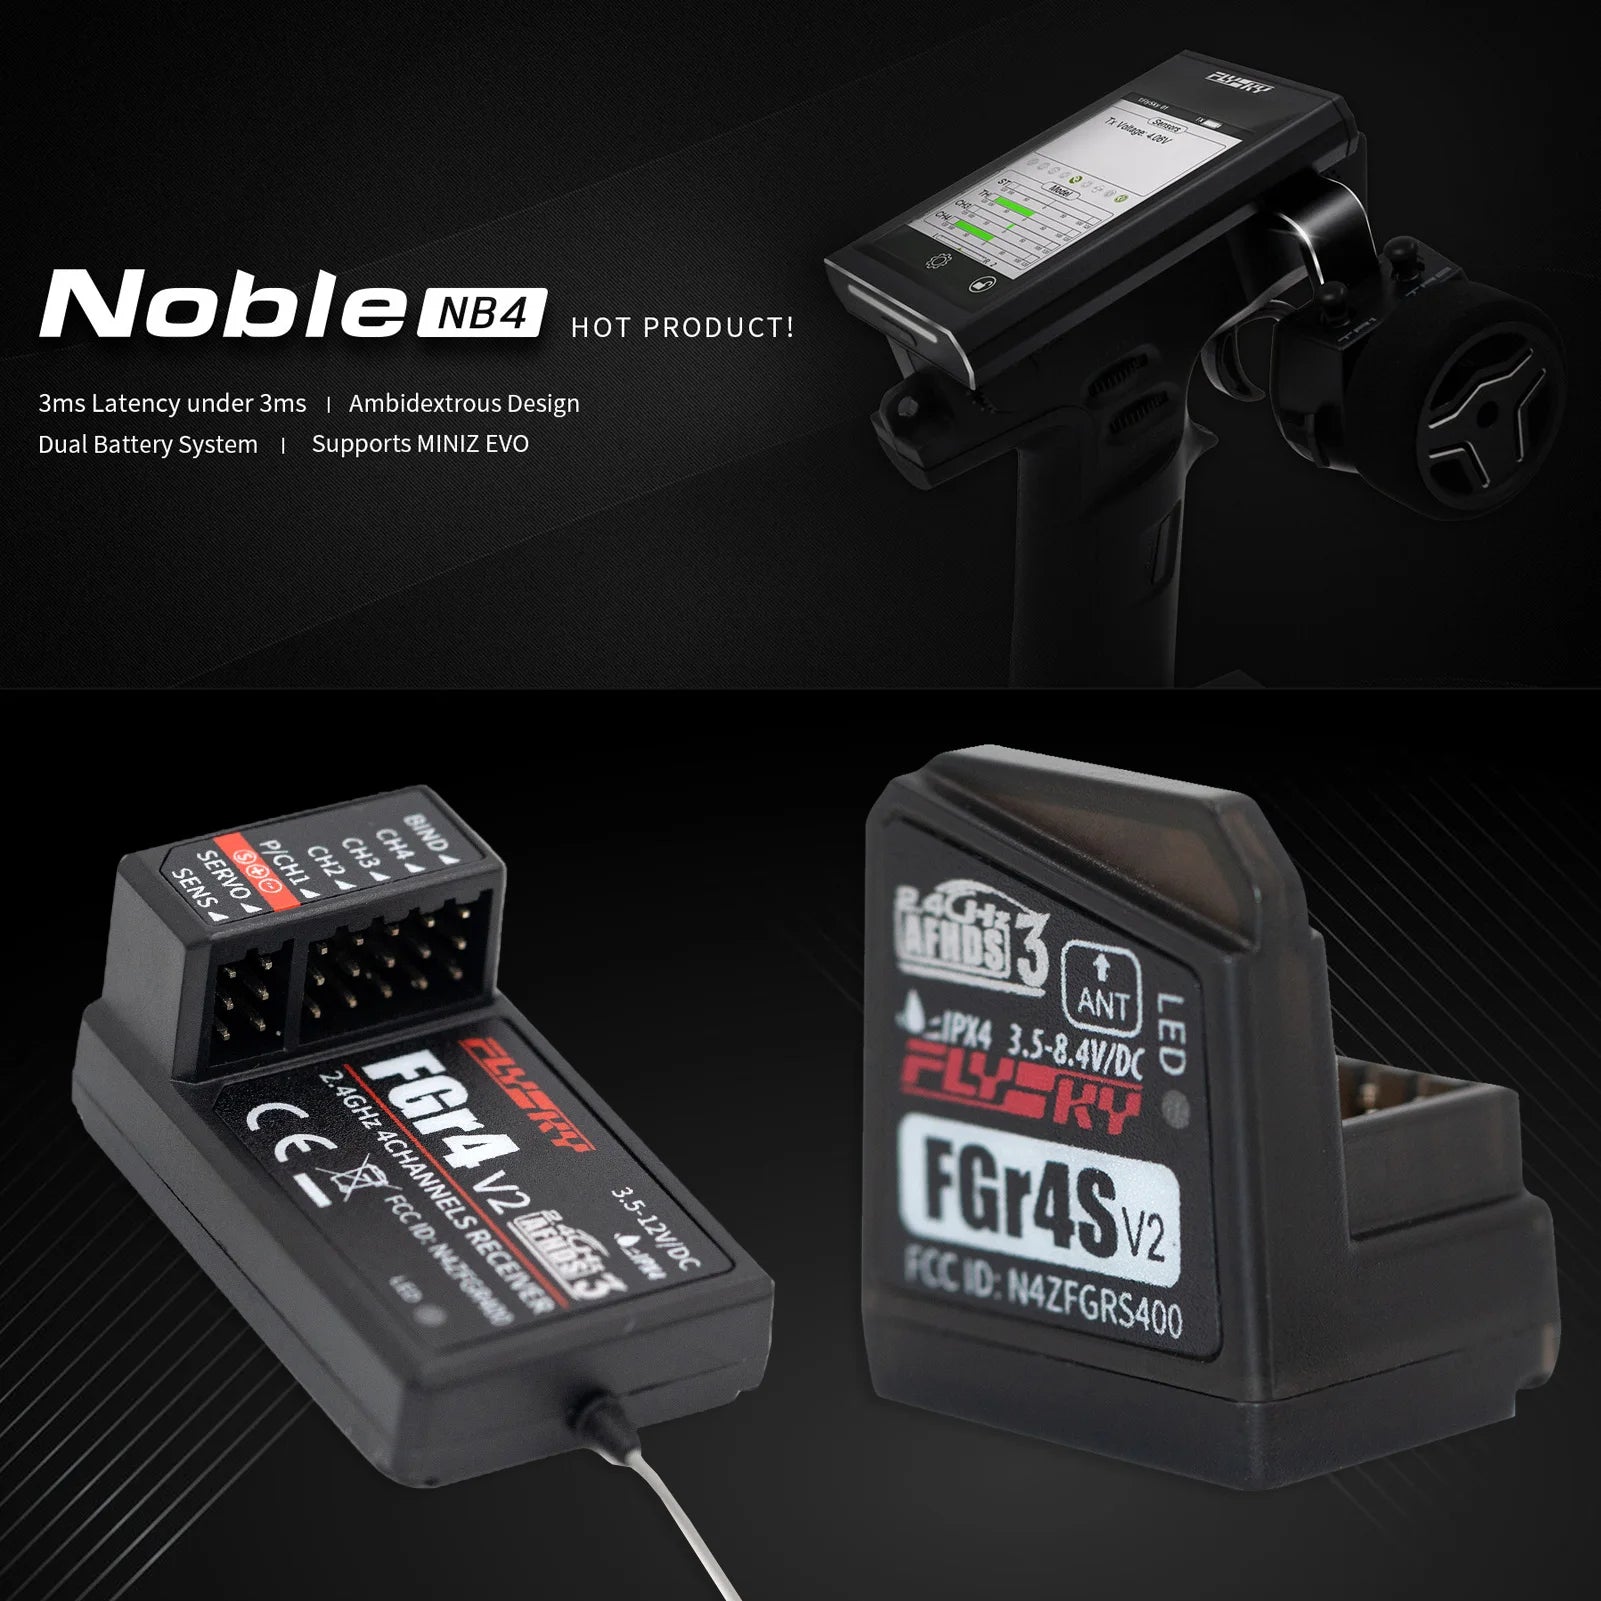 Flysky Noble NB4 2.4G 4CH Radio Transmitter, find a position that's comfortable for you, sitting, standing, or leaning